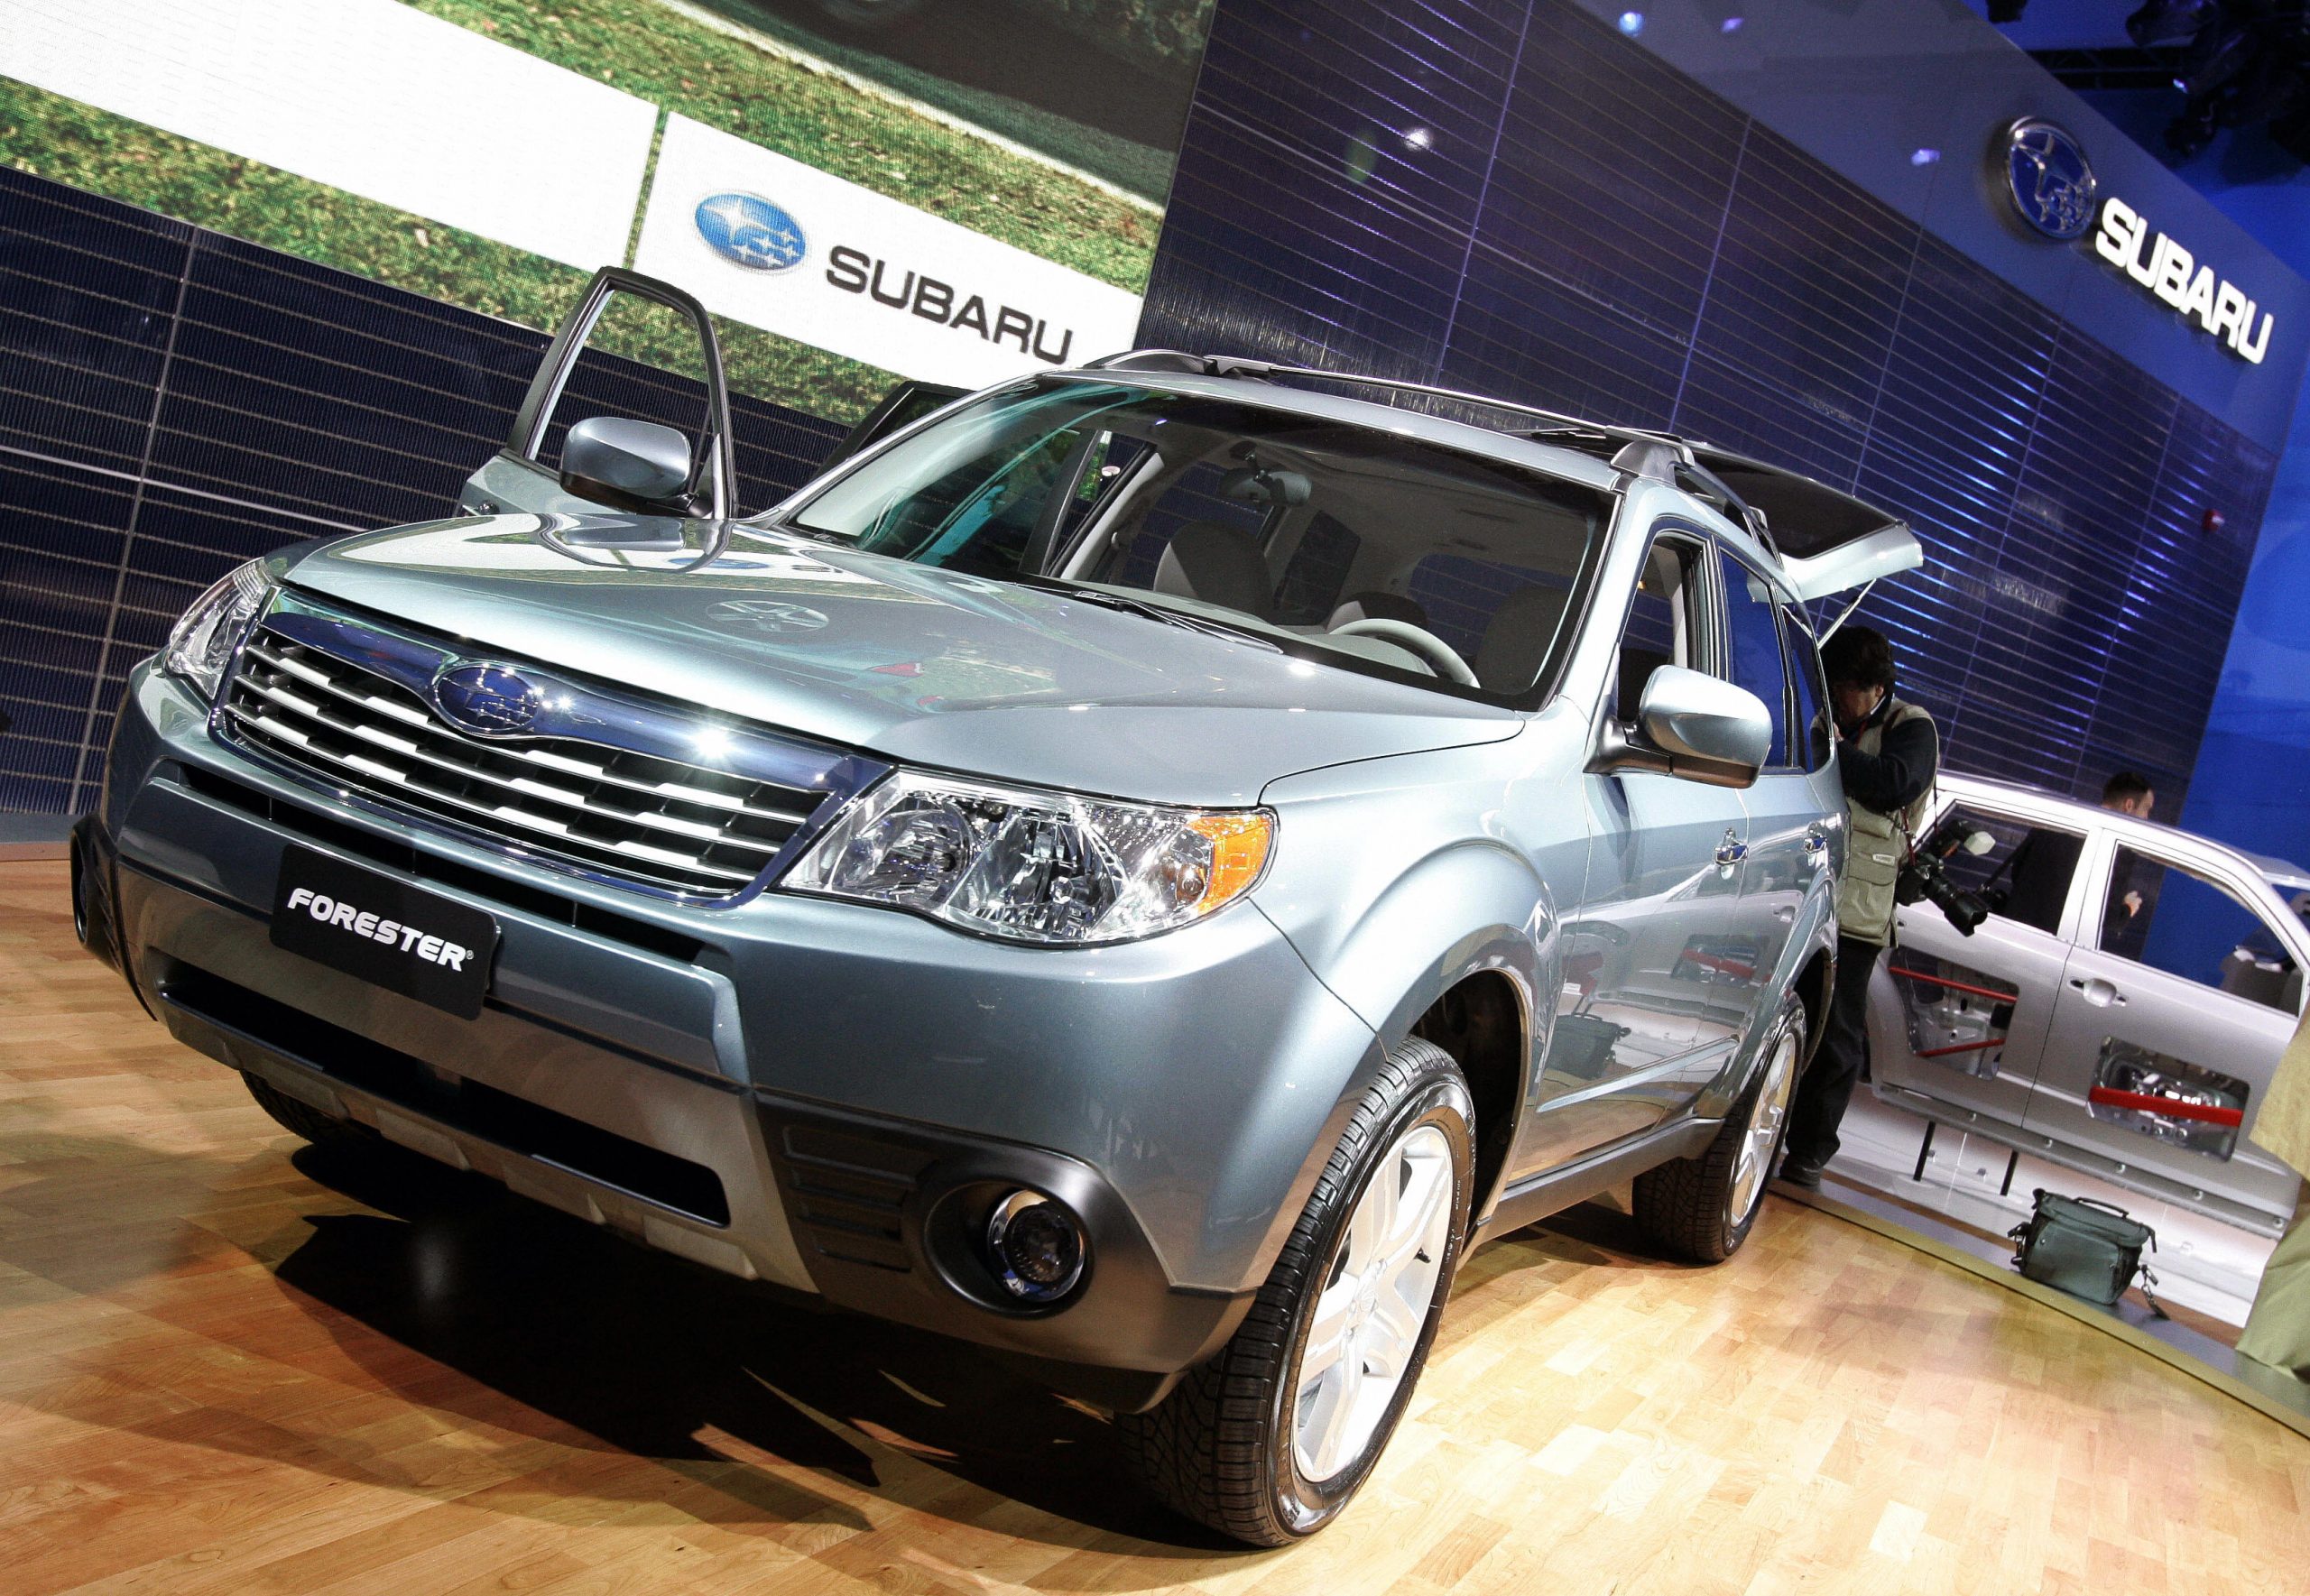 A 2009 Subaru Forester on display at an auto show